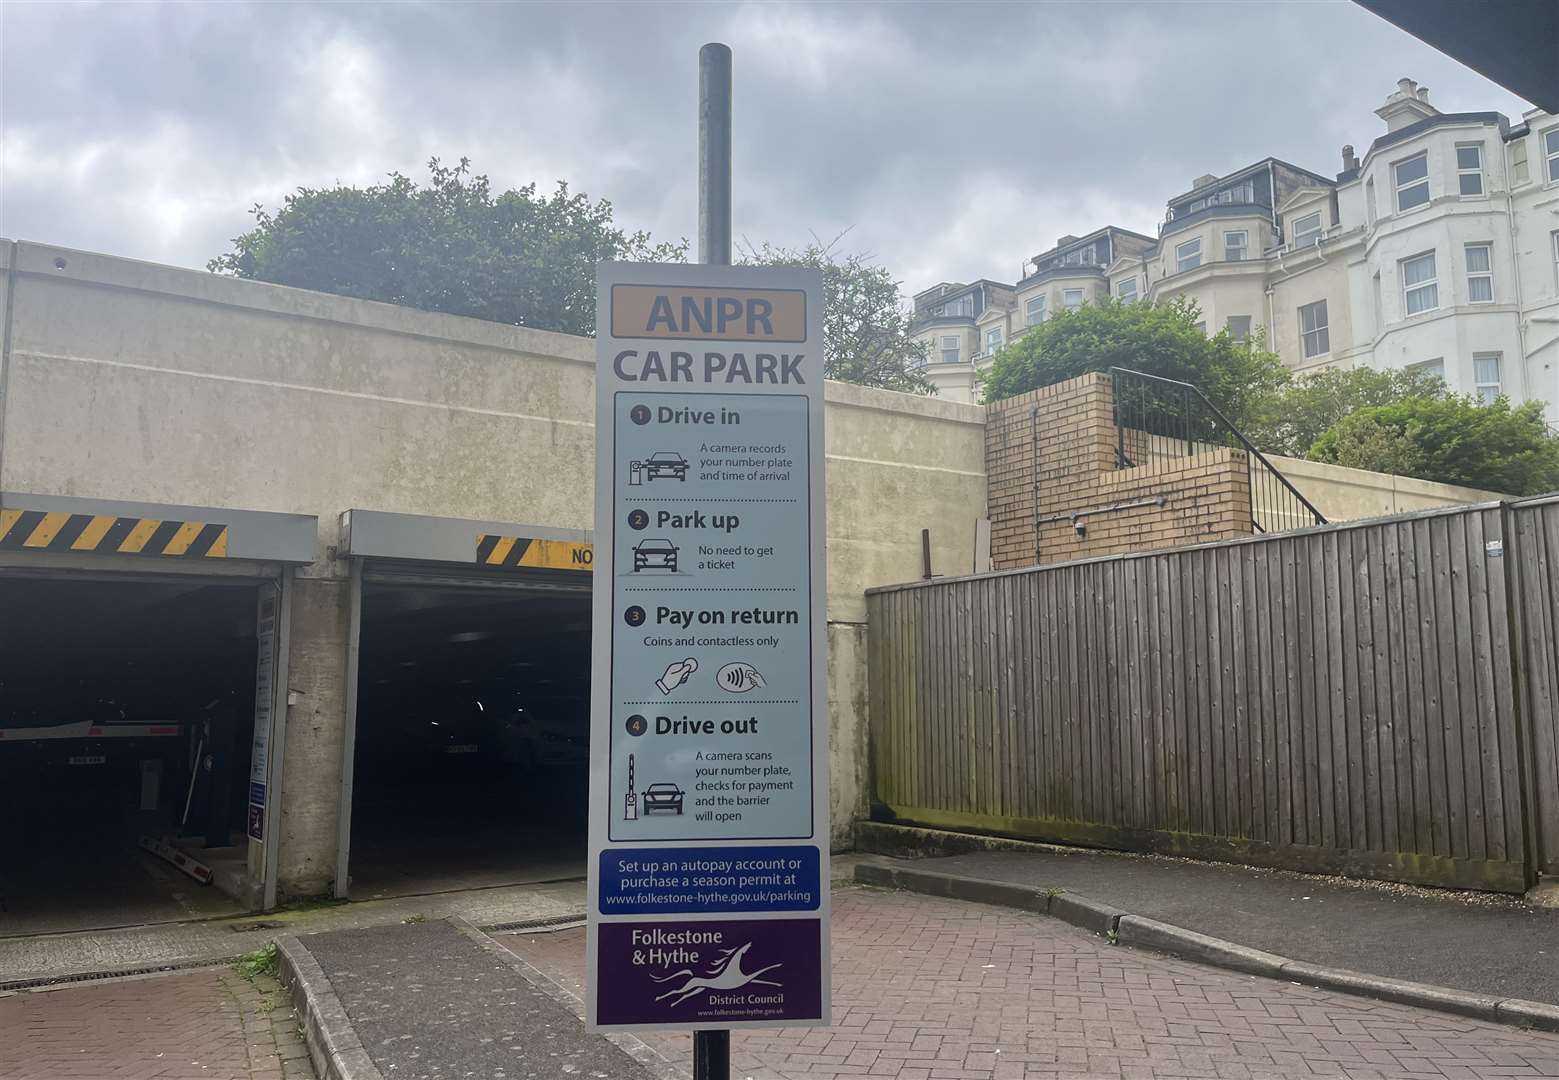 ANPR cameras were added to Sandgate Road car park in Folkestone in February as part of a 12-month trial; a tunnel at the rear of the car park leads to the Leas Cliff Hall